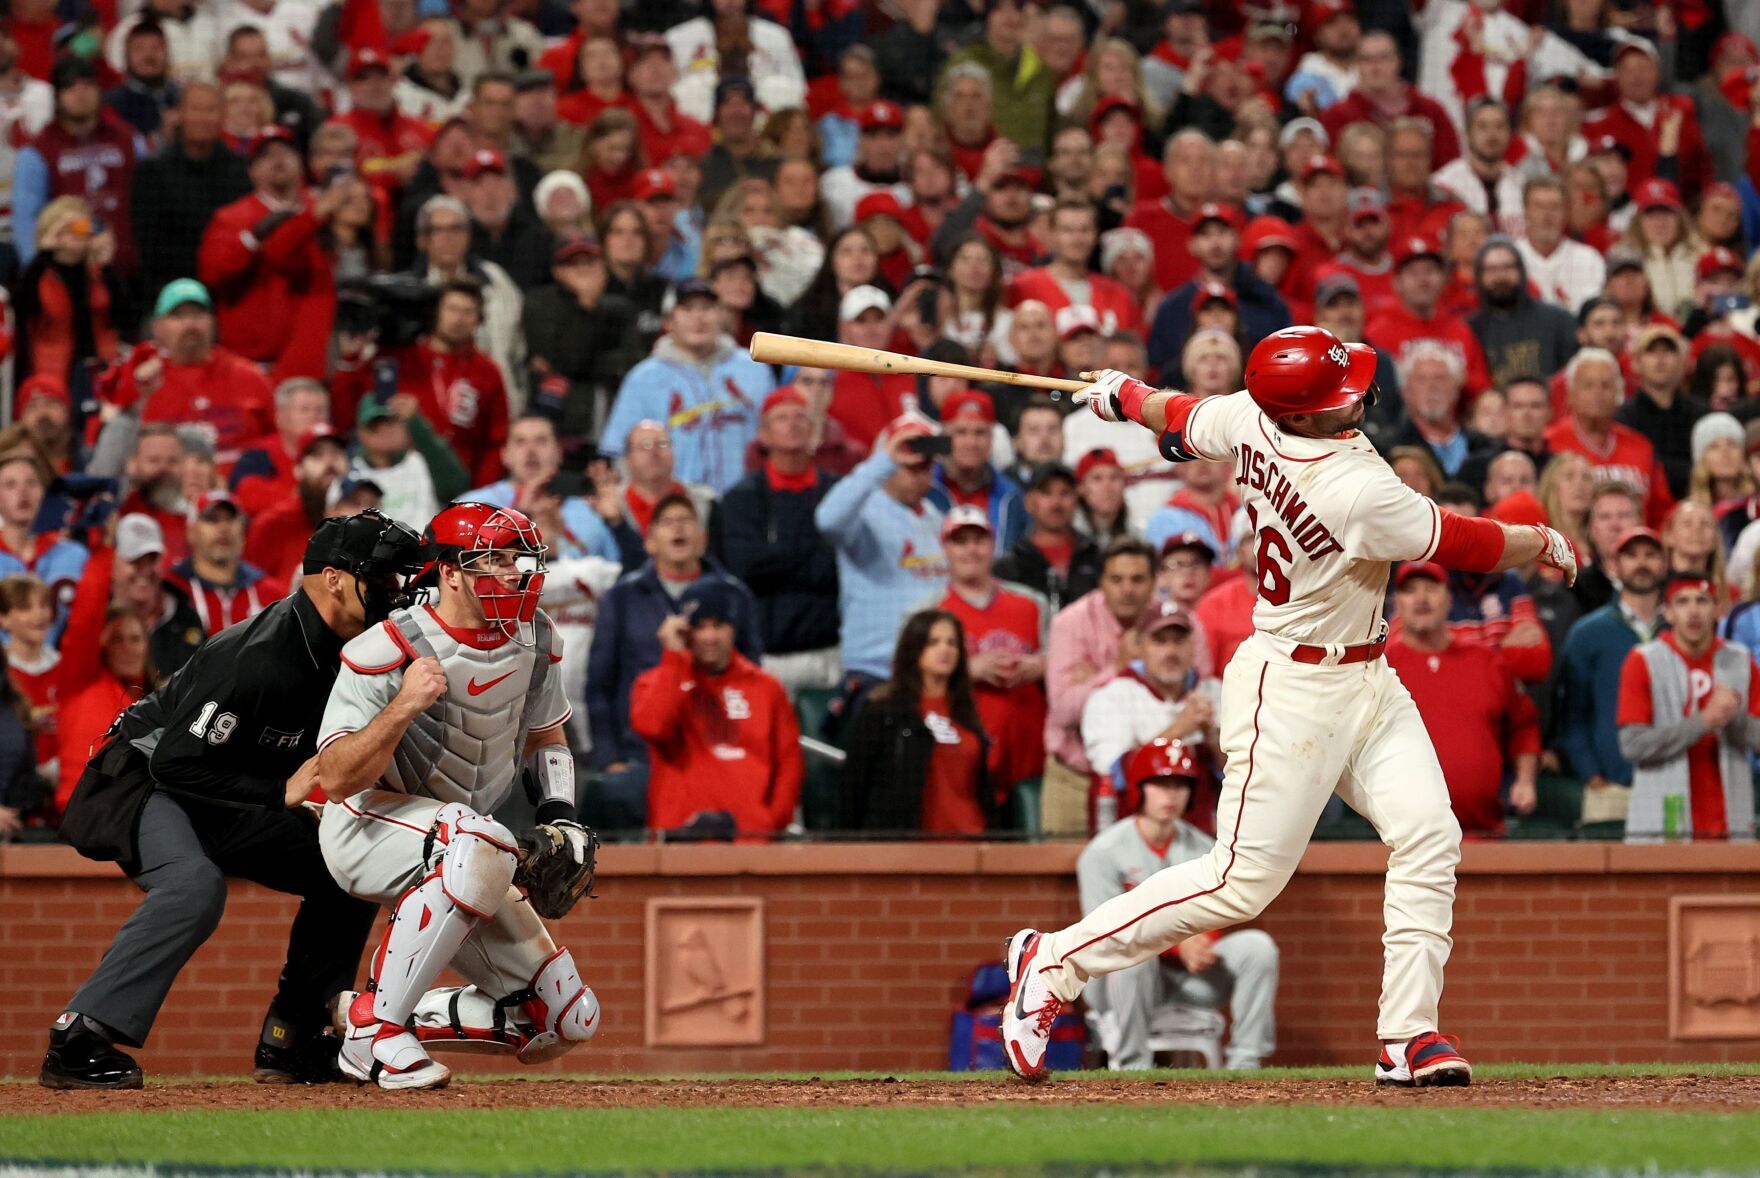 BenFred Postseason shrinkage continues for Cardinals offense in latest quick exit